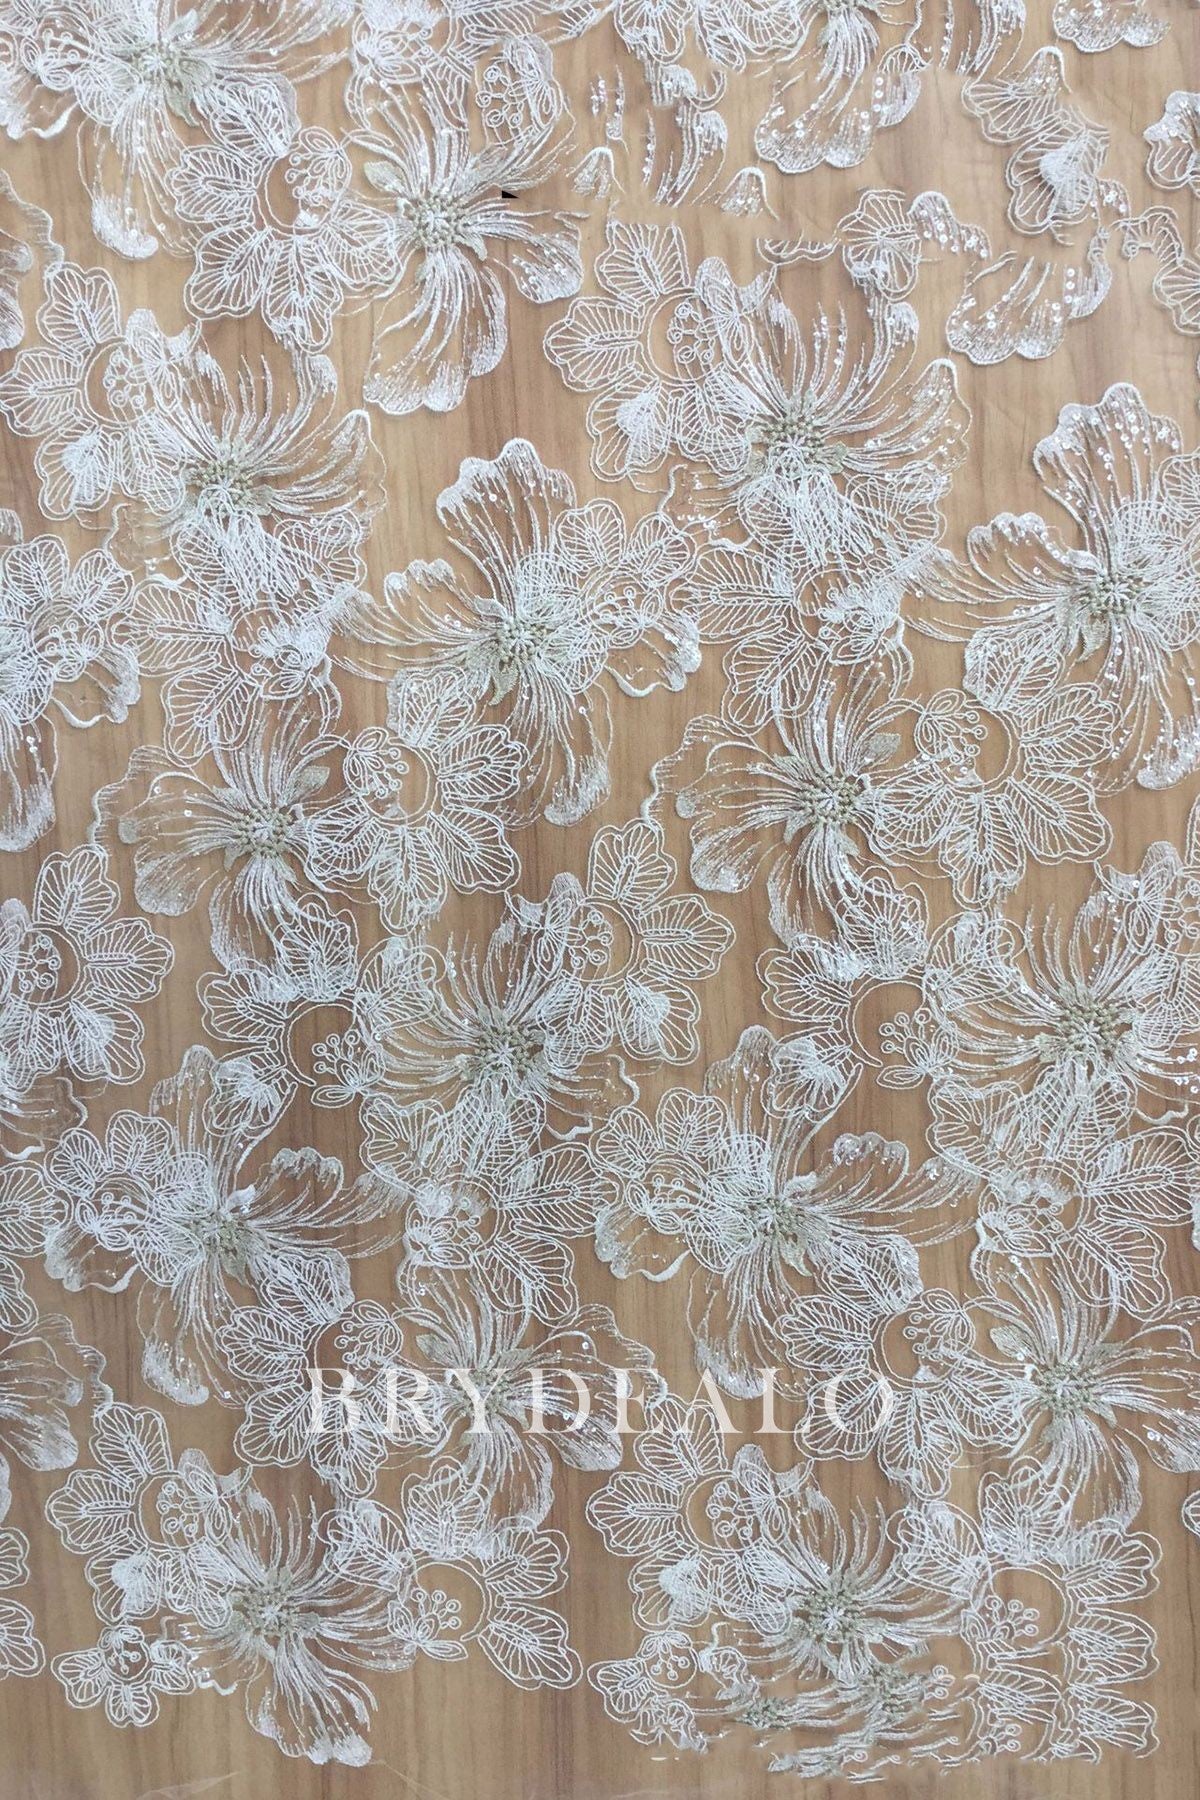 Flower Lace Fabric 